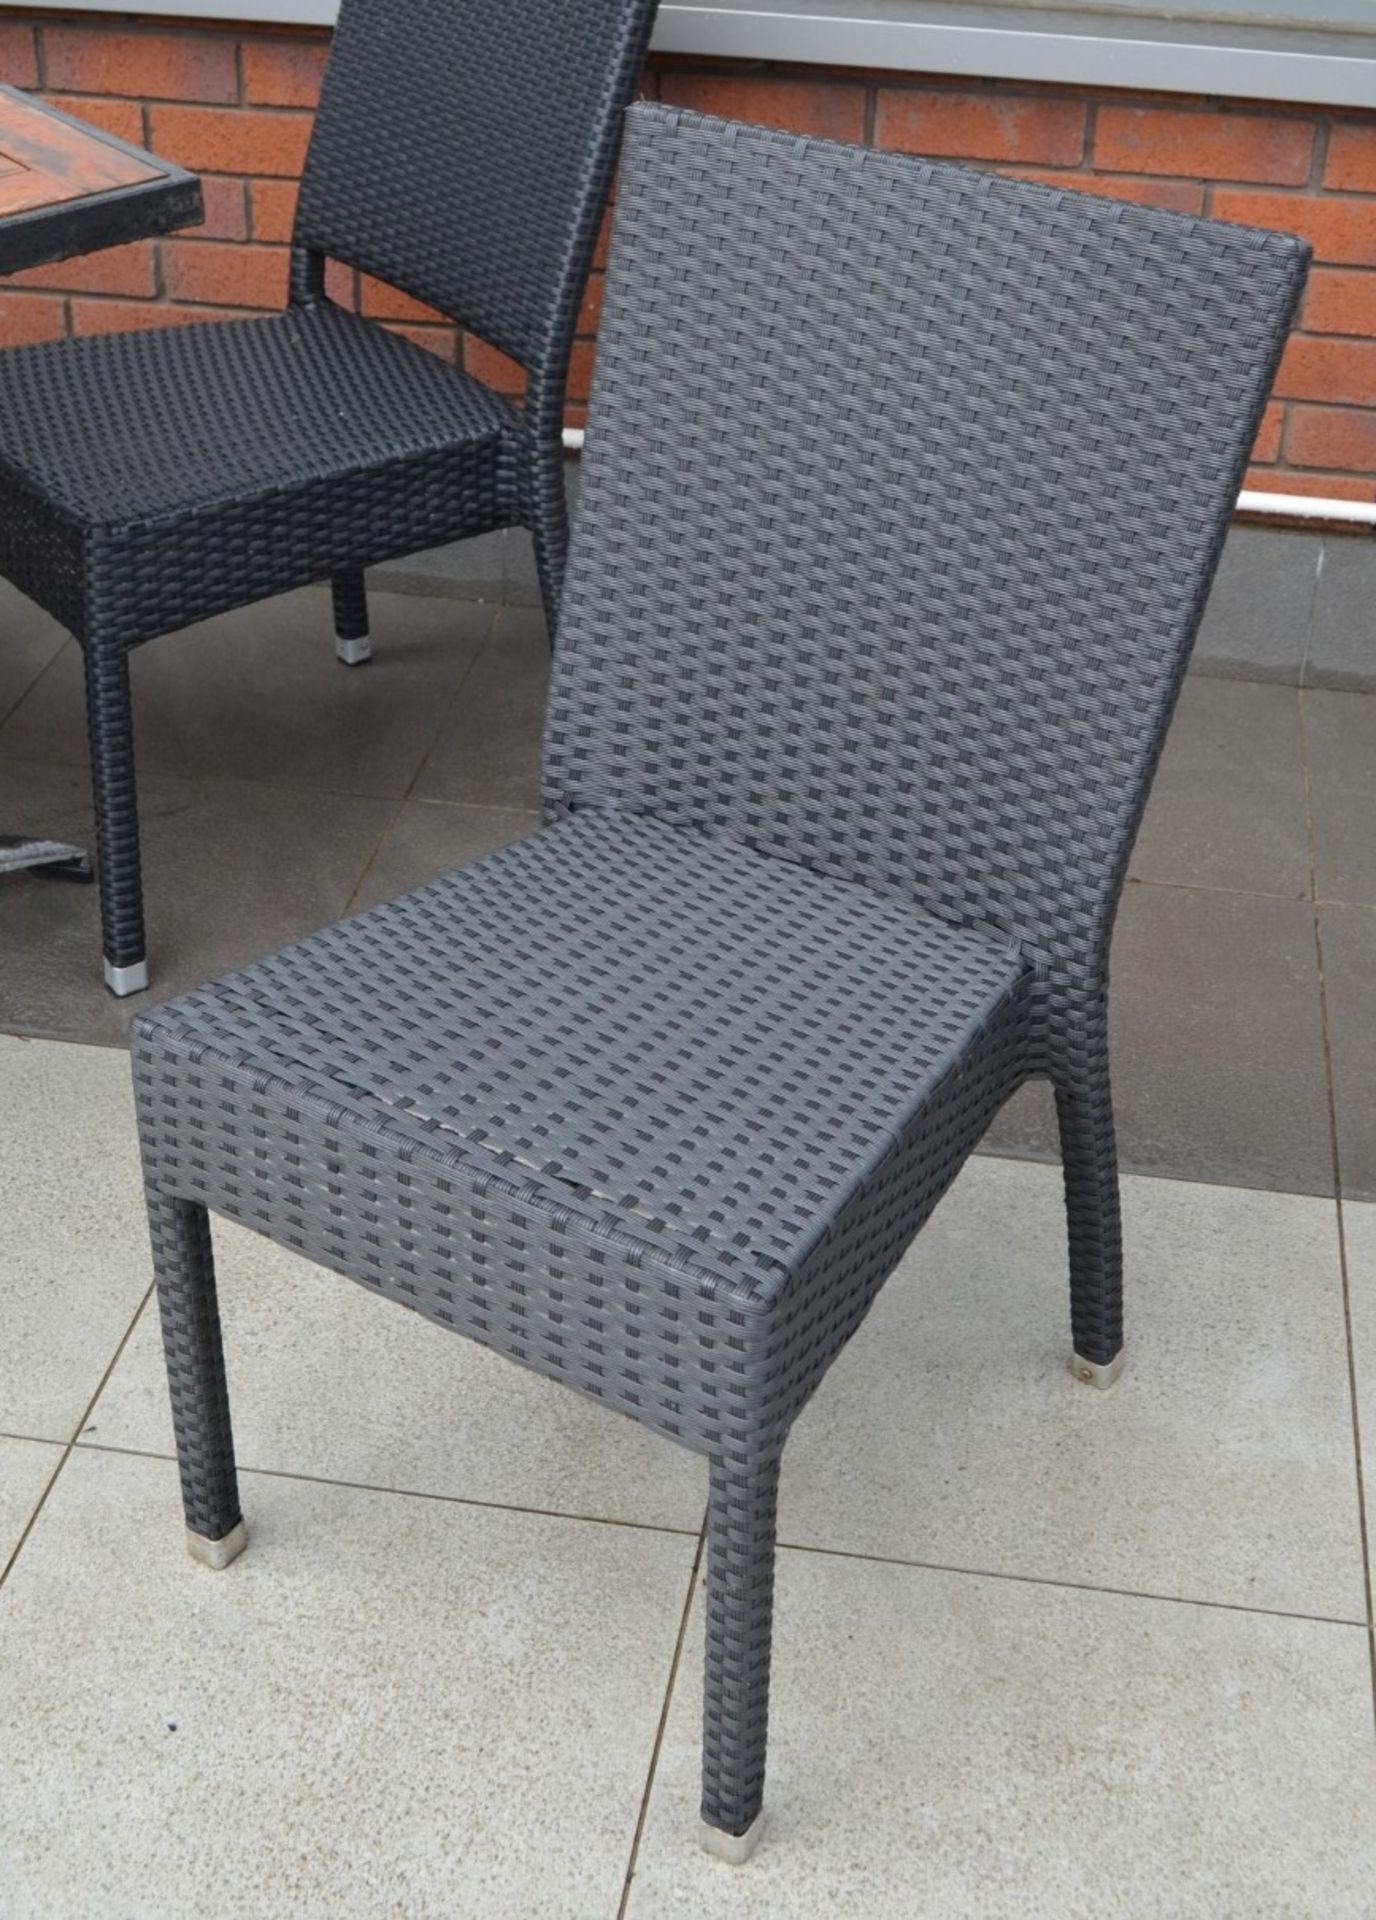 1 x Outdoor Garden Table With Four Charcoal Rattan Chairs - H72 x W74 x D74 cms - CL357 - - Bild 3 aus 3